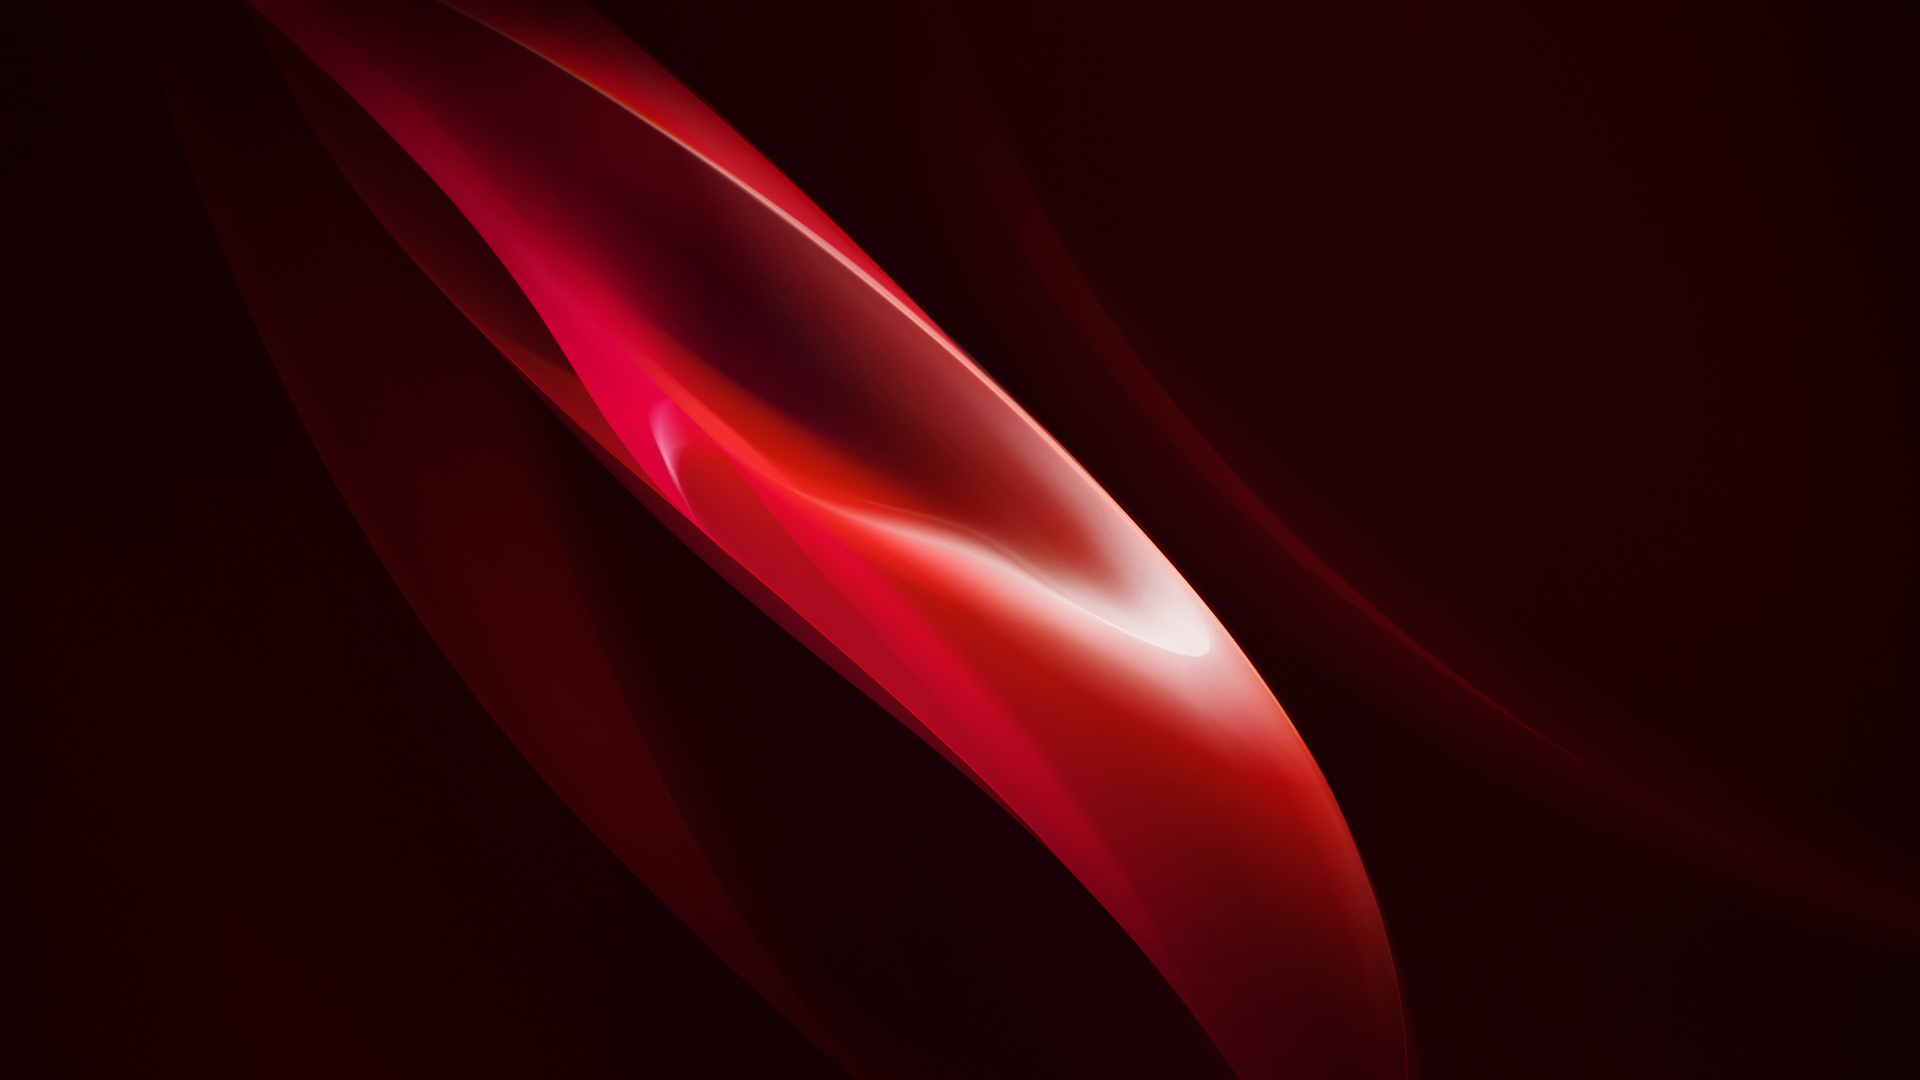 Red Ribbon Oppo R15 Wallpapers | Wallpapers HD